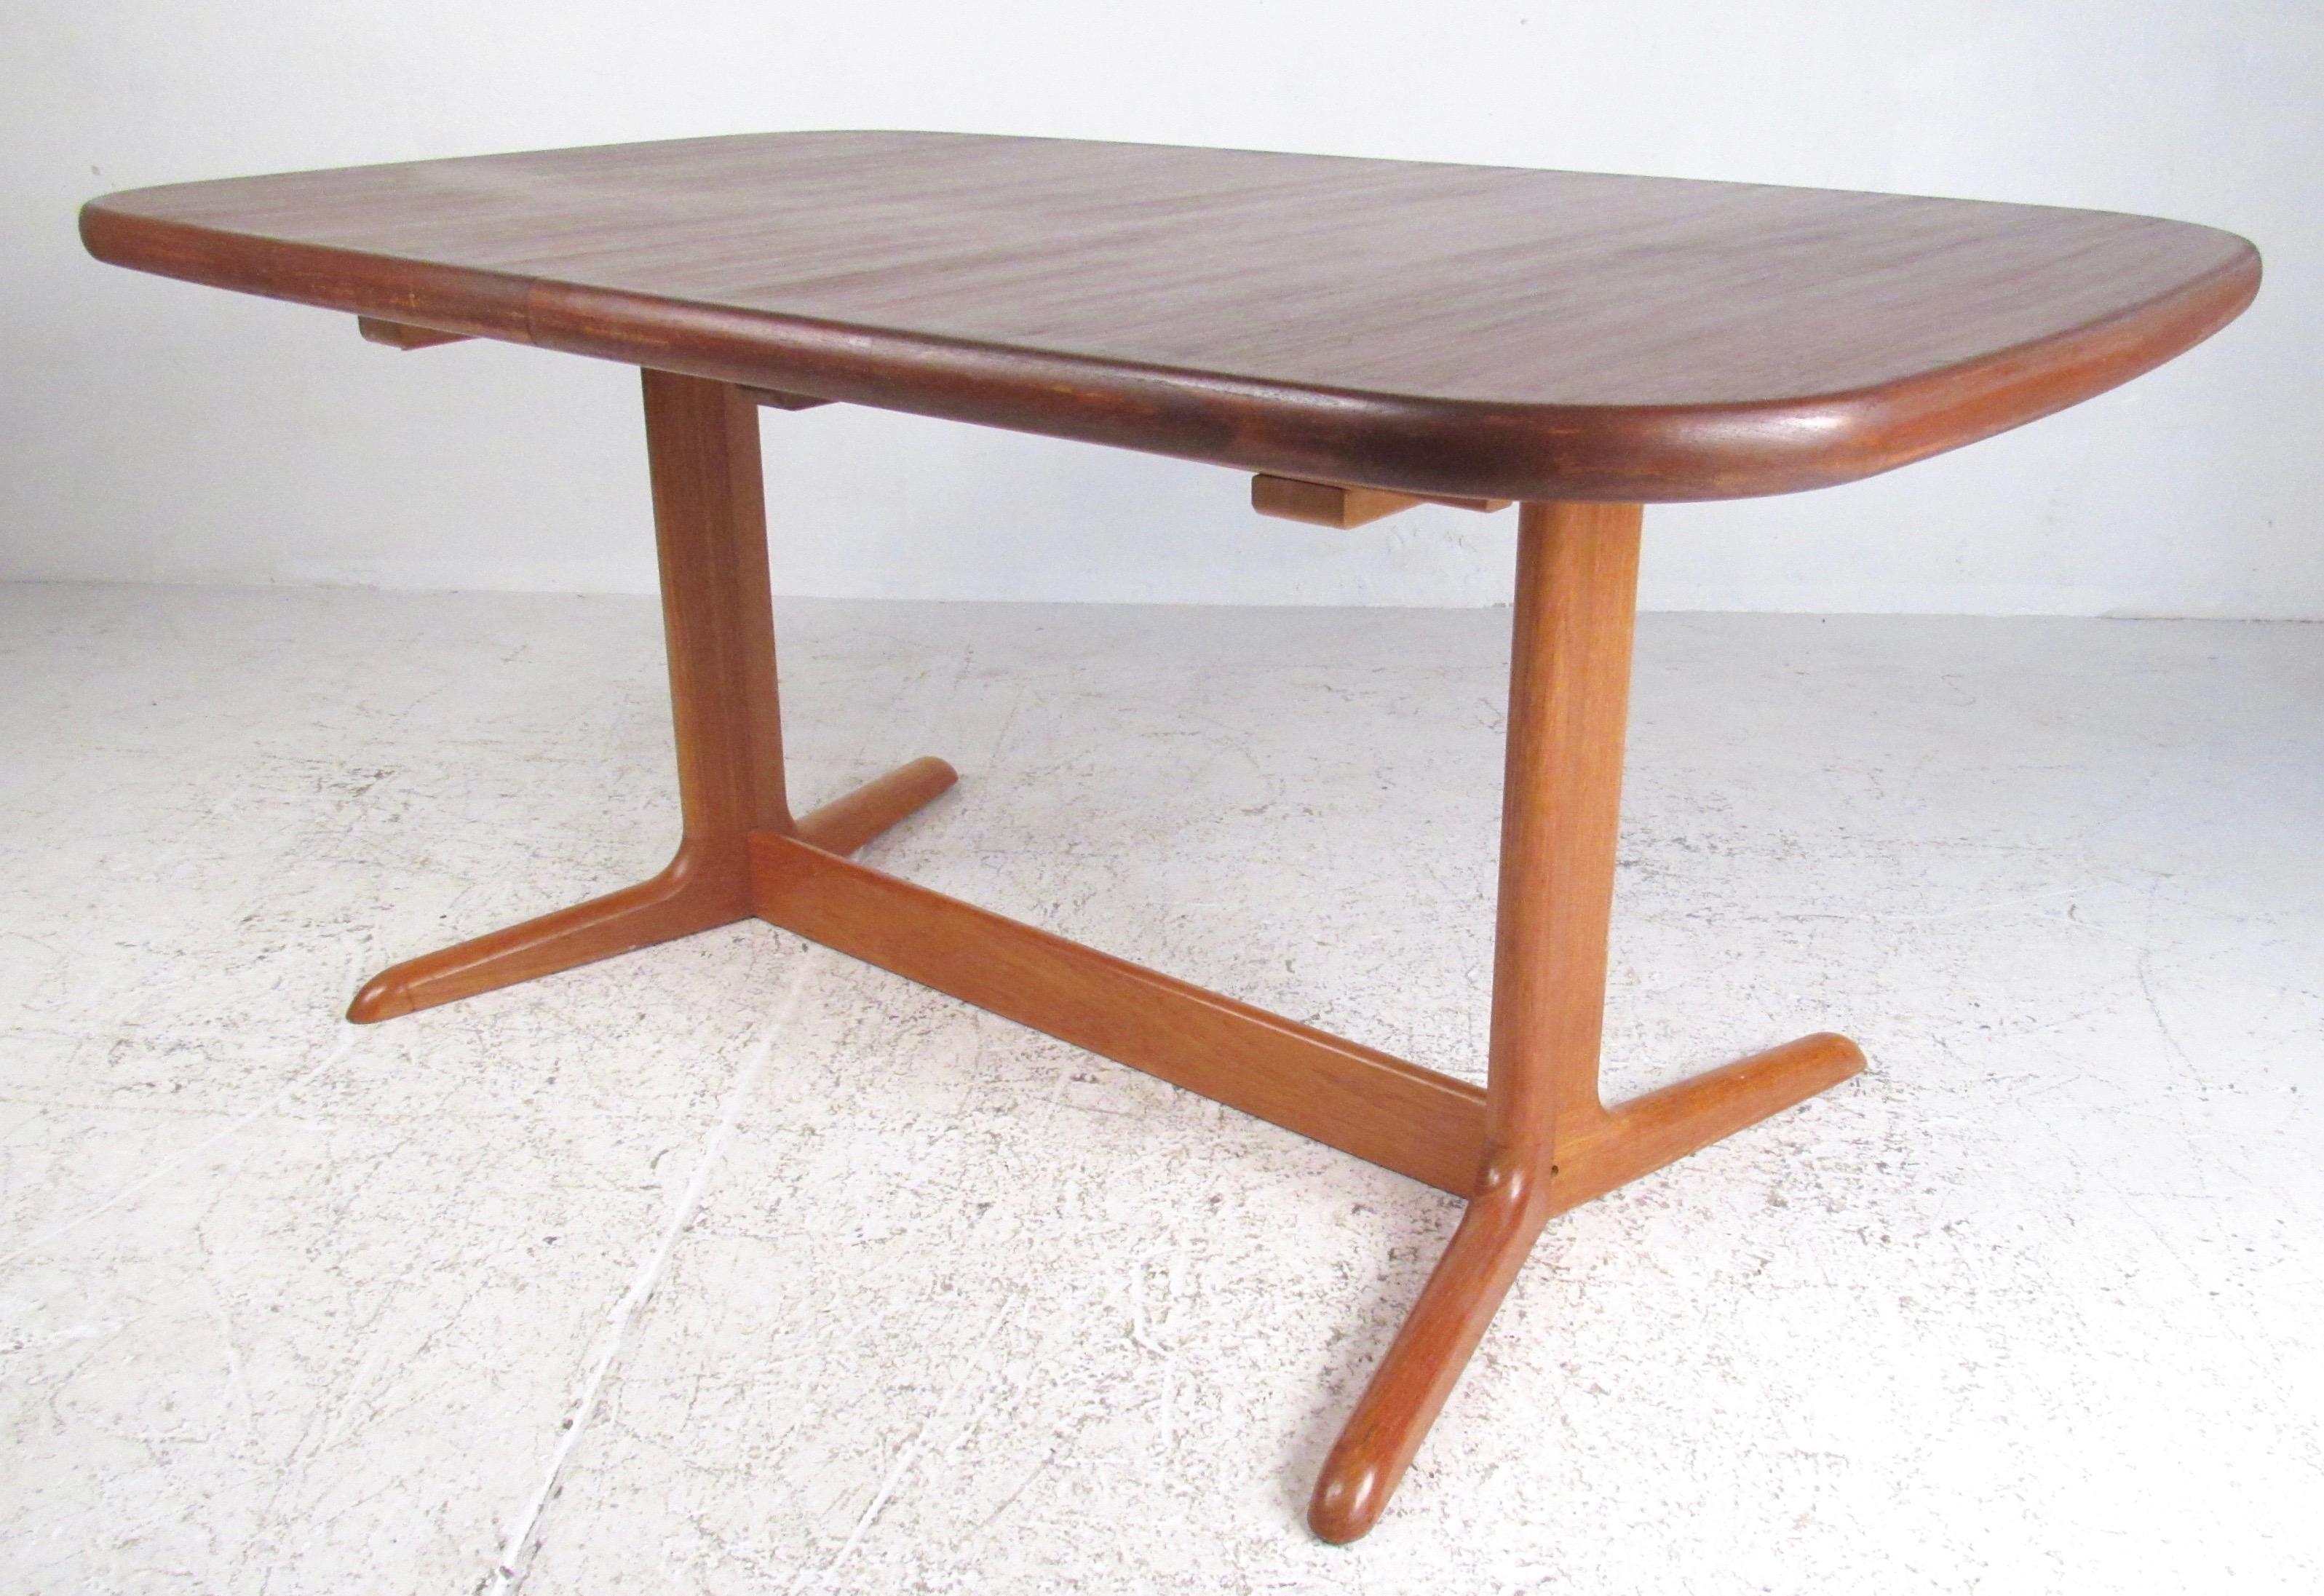 This stylish midcentury dining table features a trestle style base and thick teak finish top. Oval style table makes a striking Scandinavian modern addition to kitchen or dining room. Please confirm item location (NY or NJ).